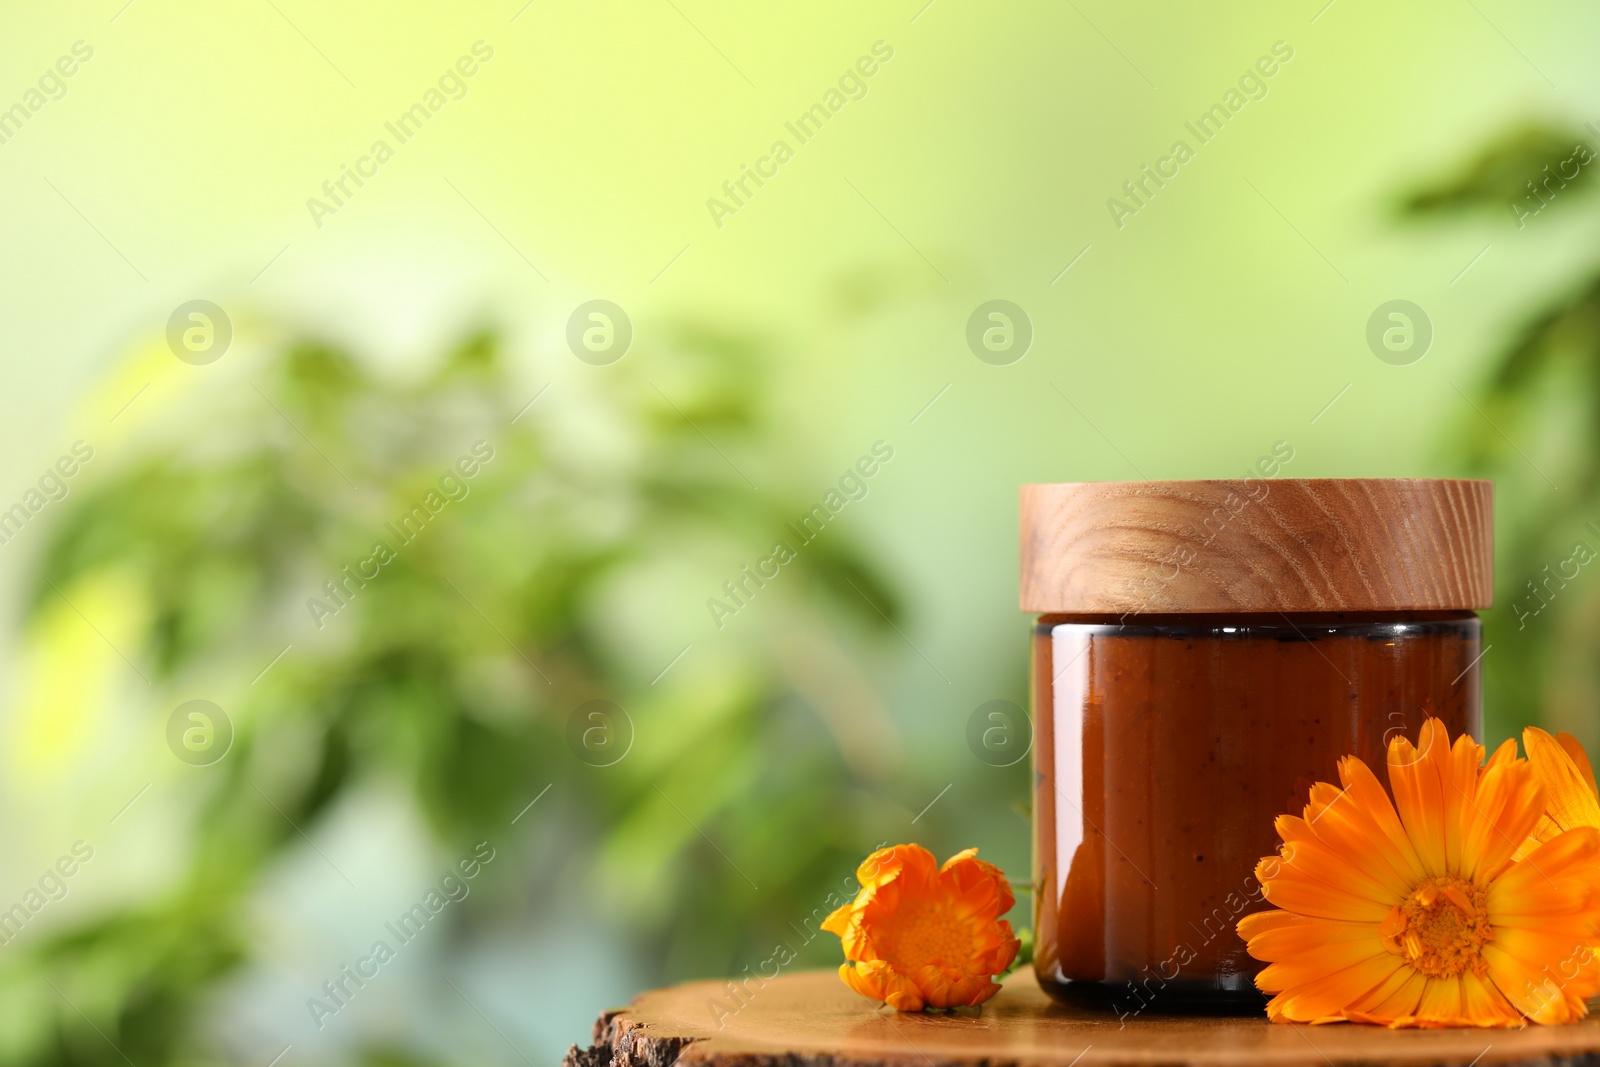 Photo of Jar of cosmetic product and beautiful calendula flowers on wooden stump outdoors, space for text